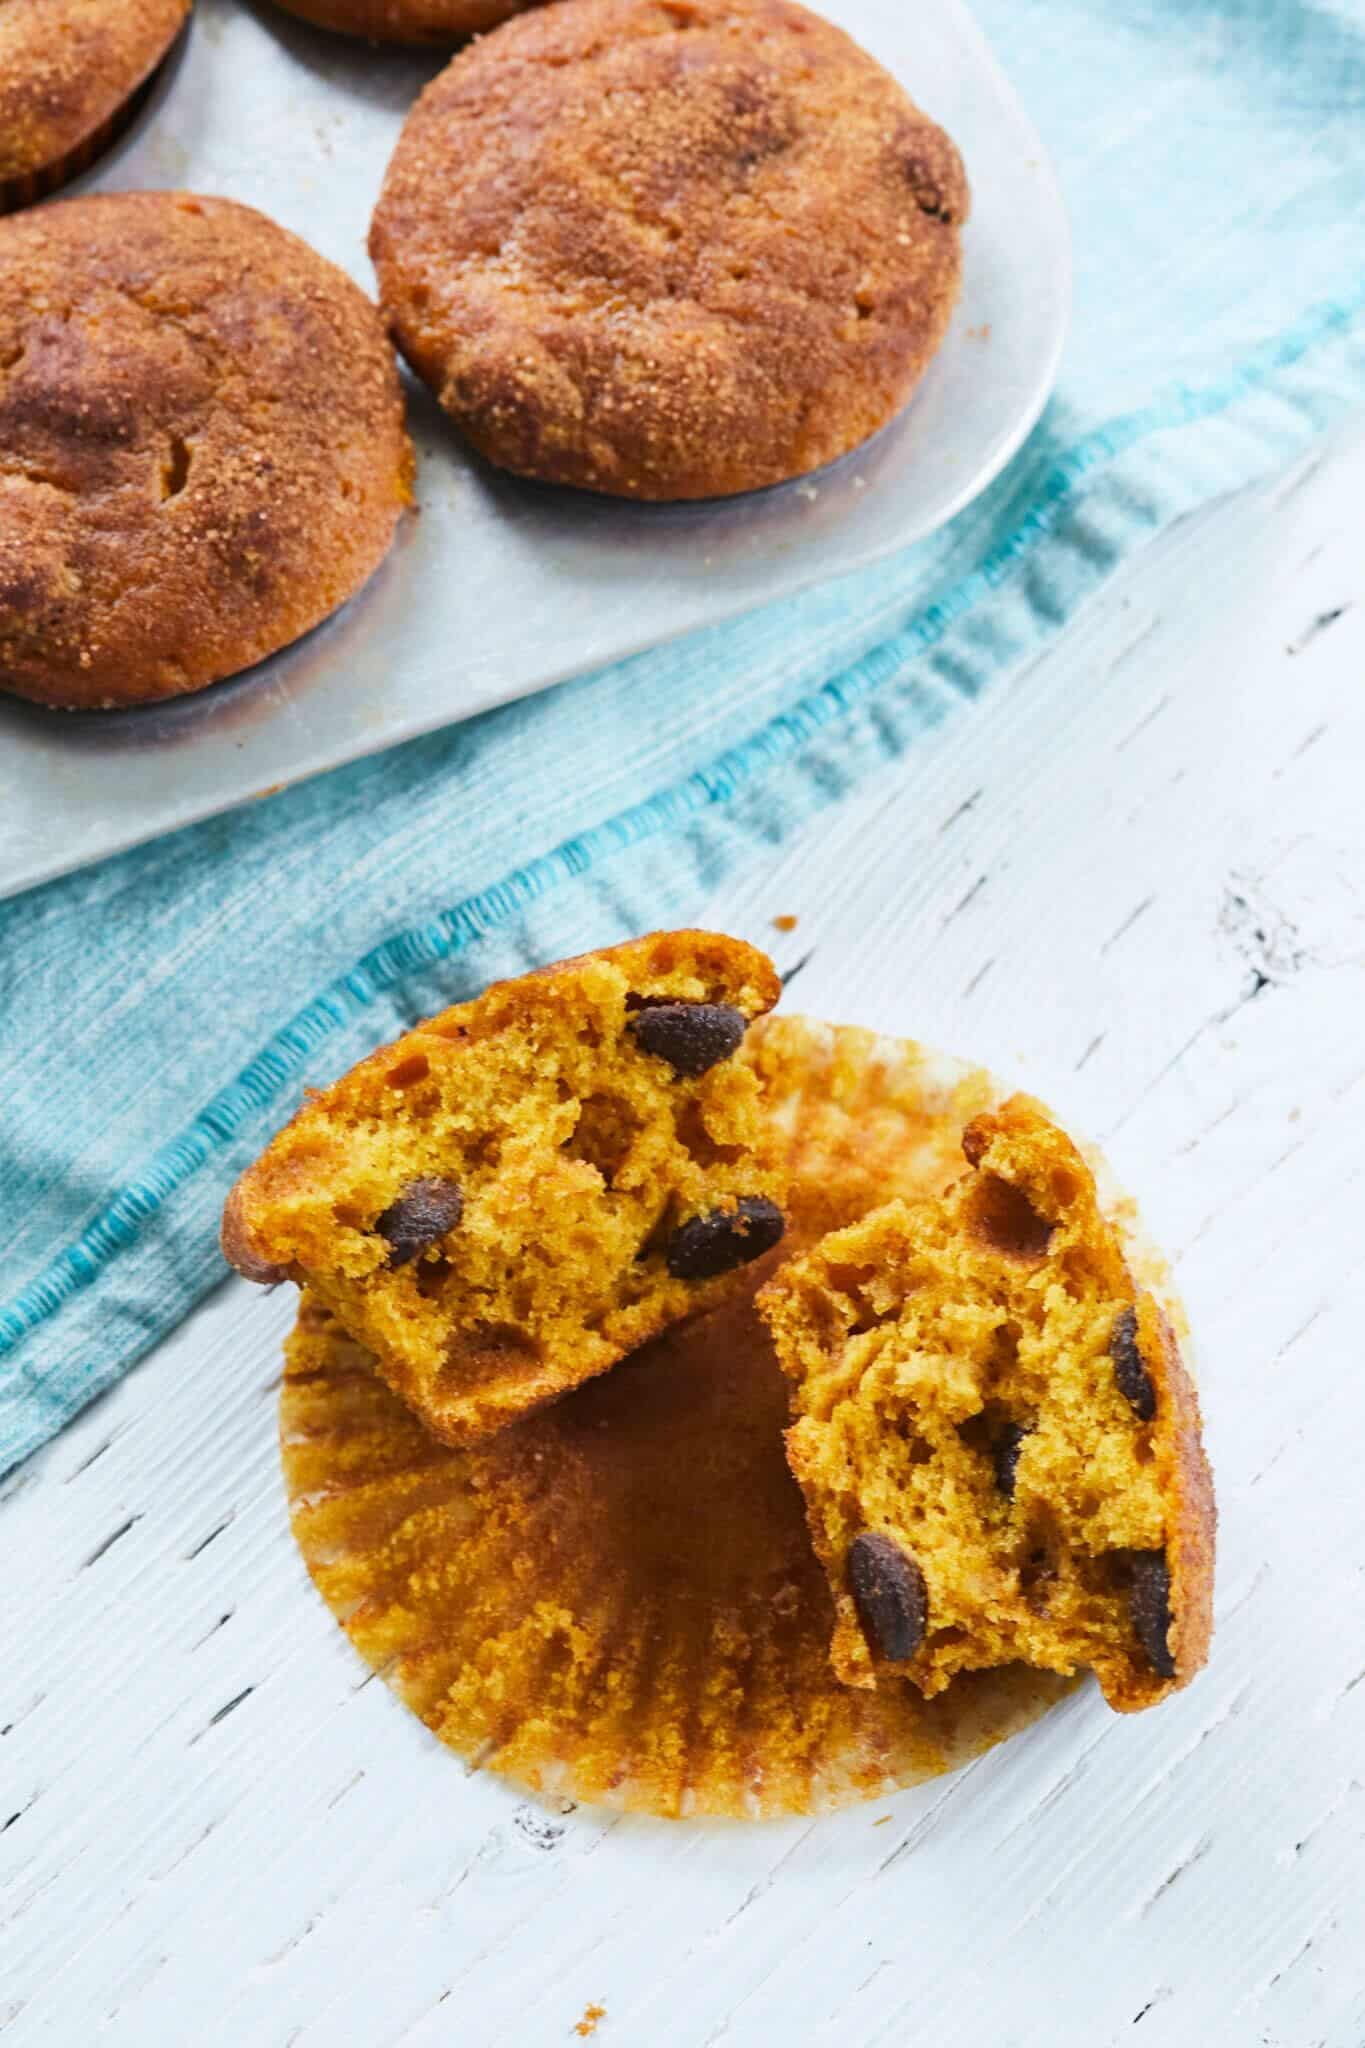 Chocolate Chip Pumpkin Muffins are baked to a perfect golden orange color with sprinkled cinnamon sugar on top. A muffin is cut into halves, showing the soft and moist inside and loaded with chocolate chips.